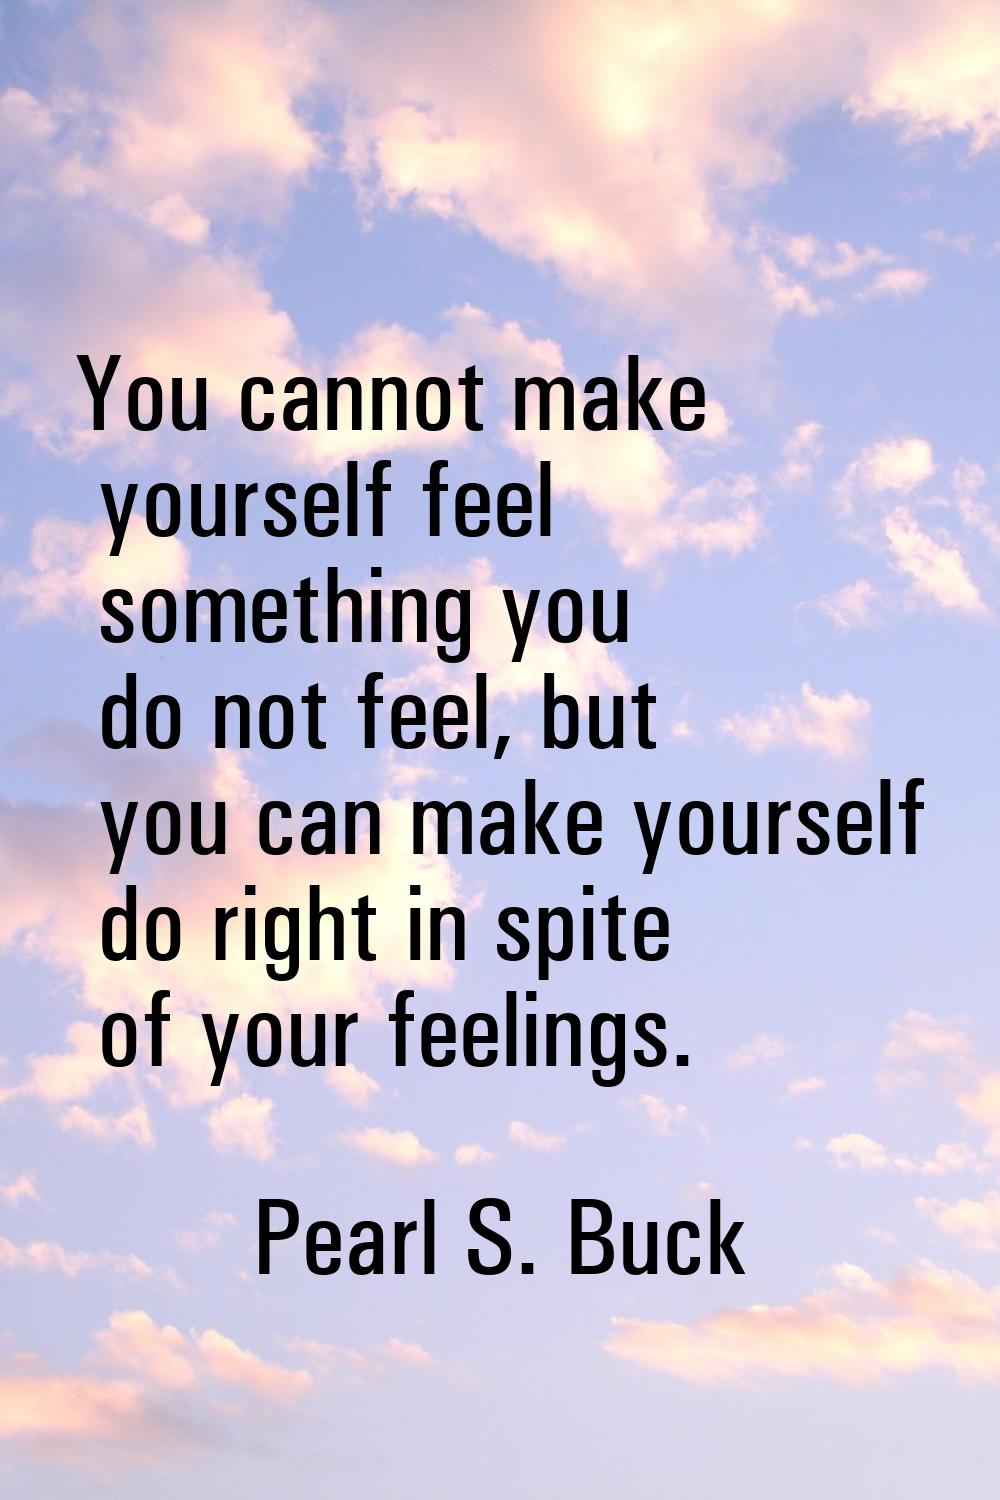 You cannot make yourself feel something you do not feel, but you can make yourself do right in spit